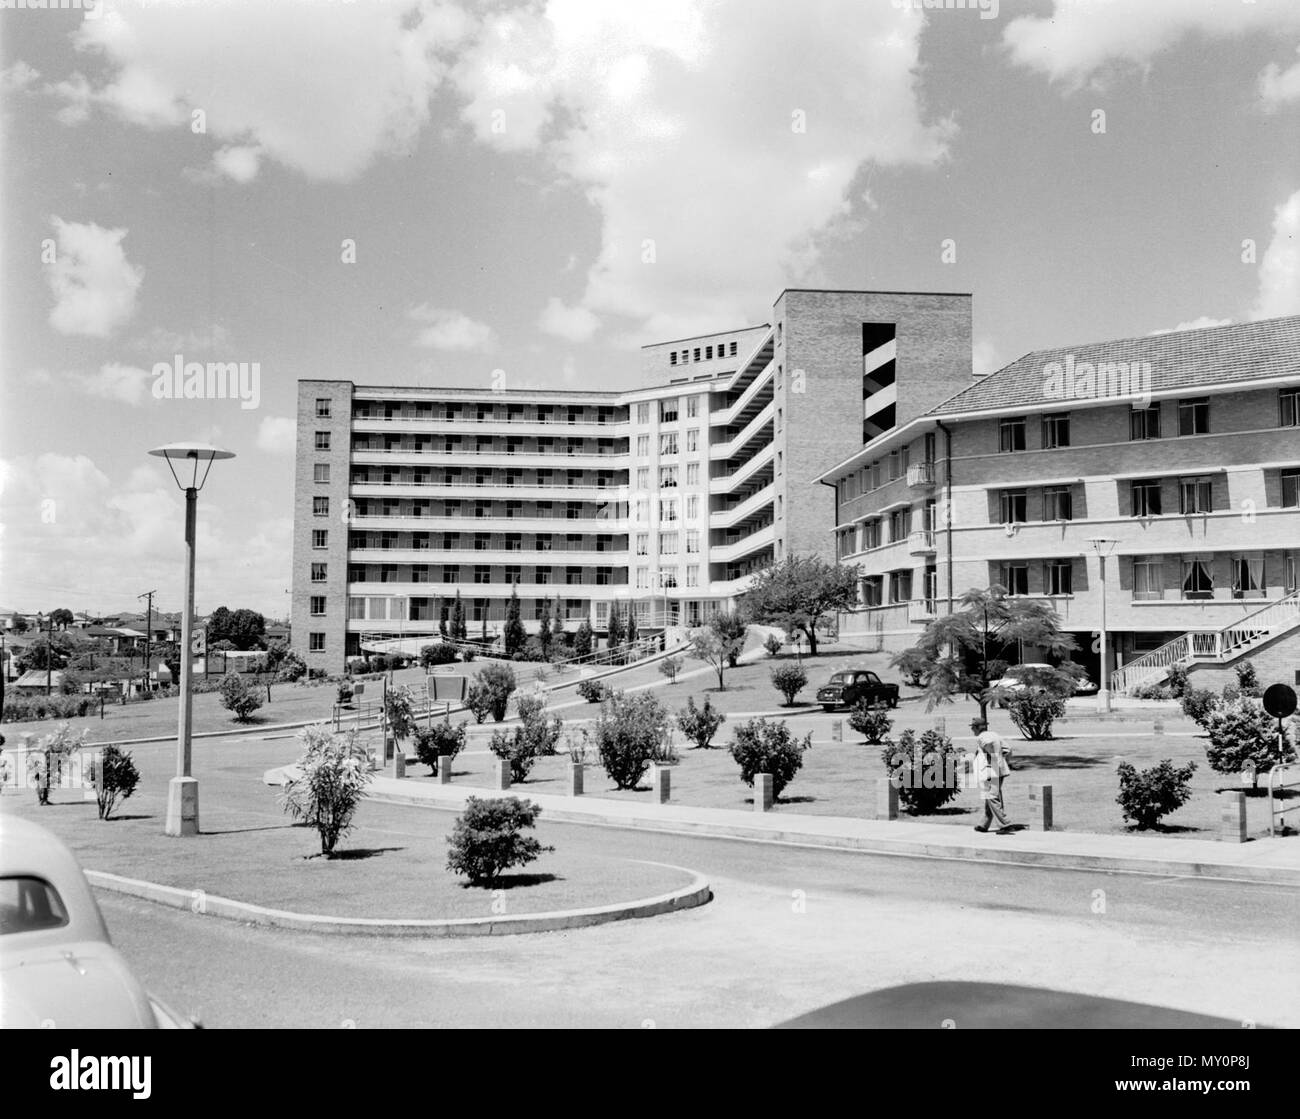 Princess Alexandra Hospital, Woolloongabba, 1961. The hospital was built on the site of the 1883 Diamantina Orphanage. In 1901 it became the Diamantina Hospital for Chronic Diseases, then 1943 the South Brisbane Auxiliary Hospital, then South Brisbane Hospital in 1956 and finally the Princess Alexandra Hospital in 1959. Stock Photo